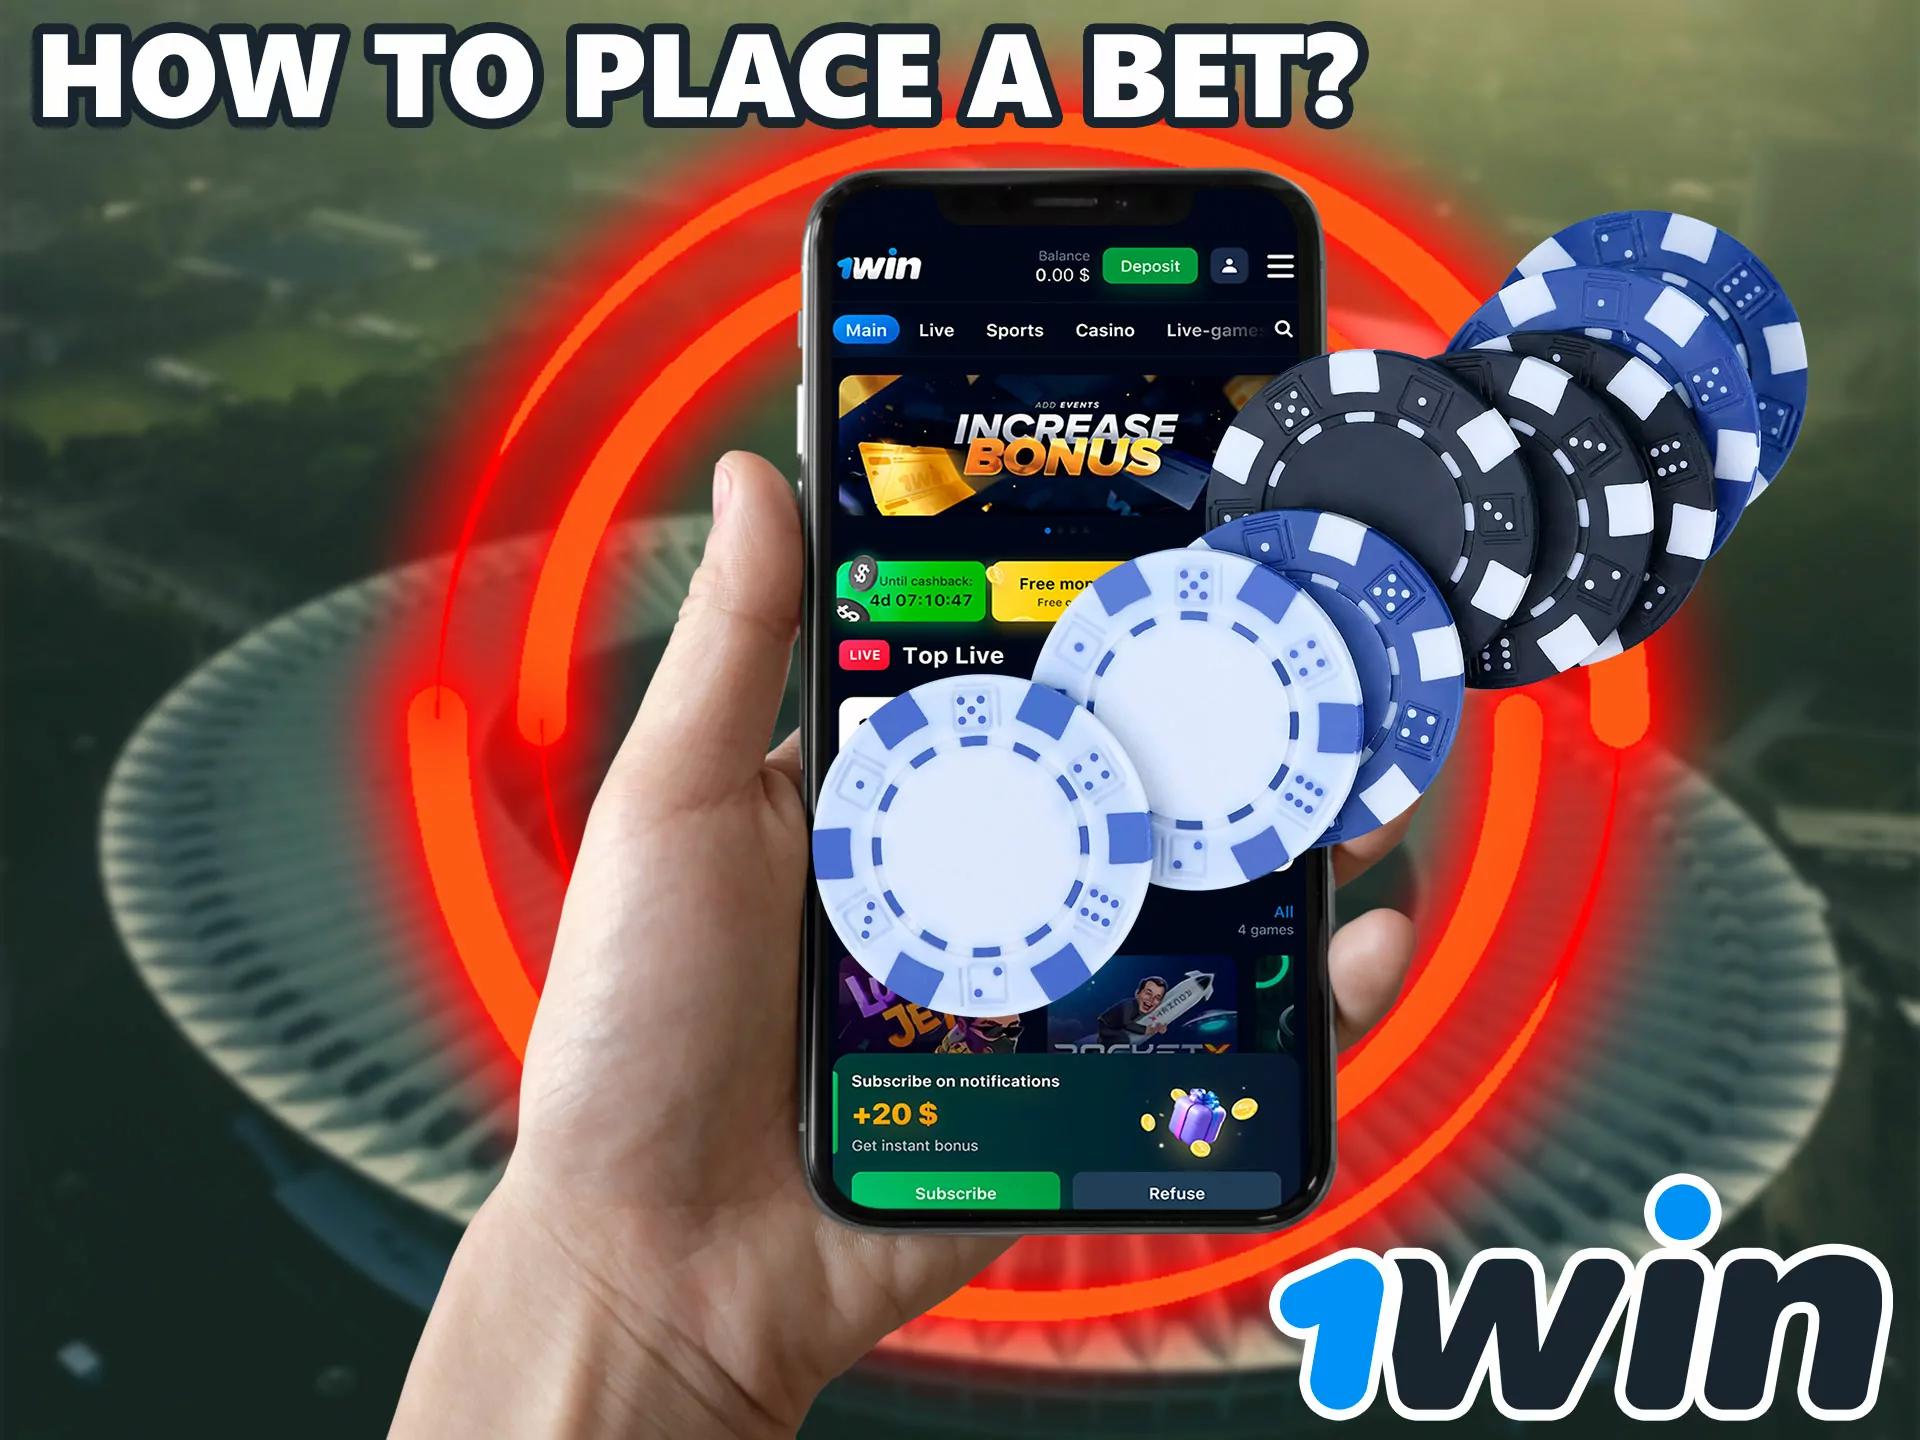 Our guide details the process of placing your first bet, just follow step by step.